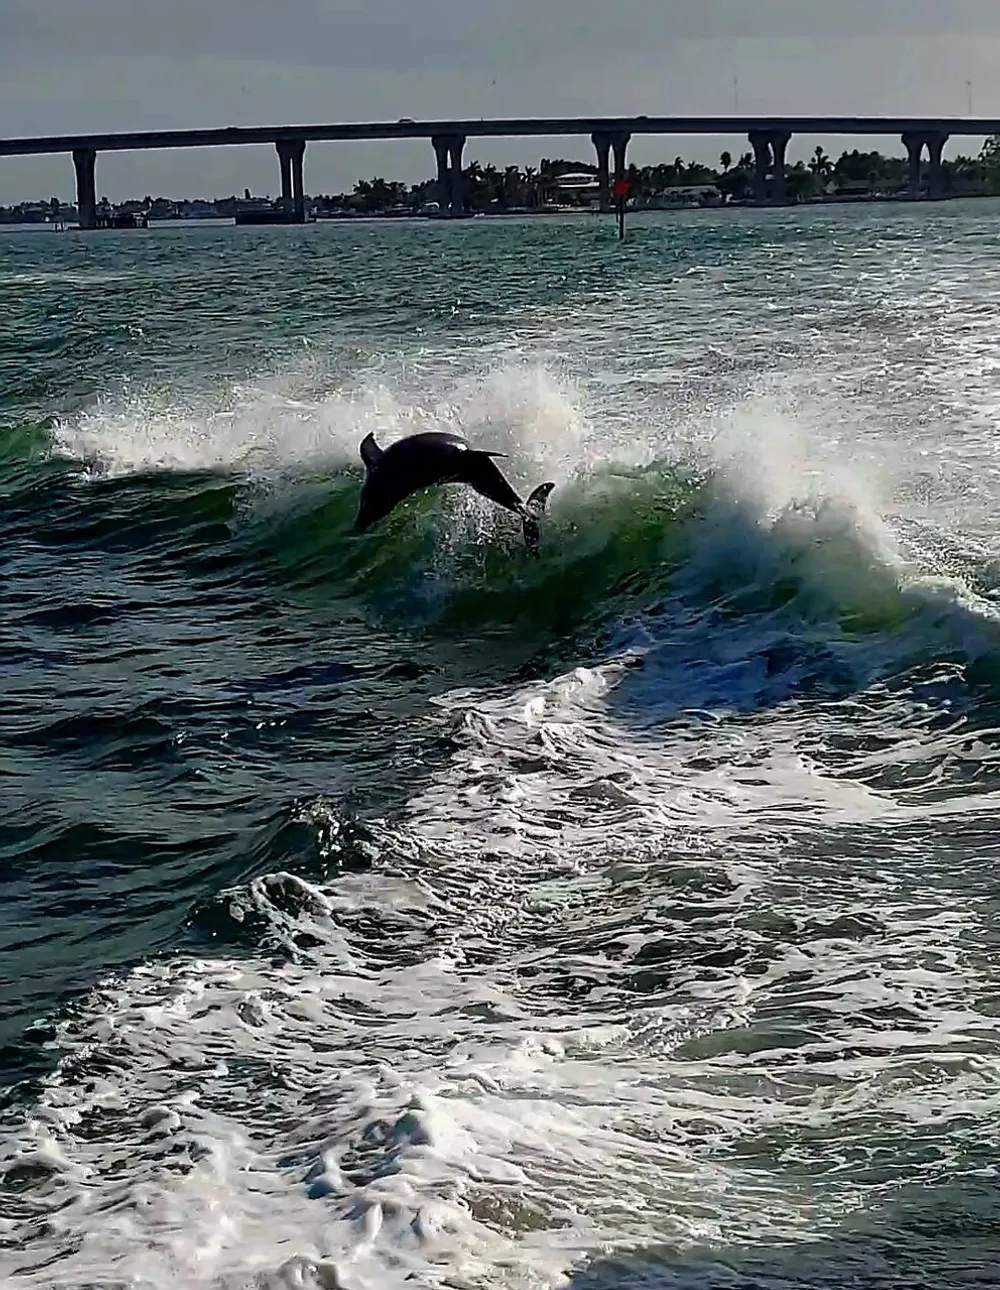 A dolphin is leaping out of the water with a bridge in the background